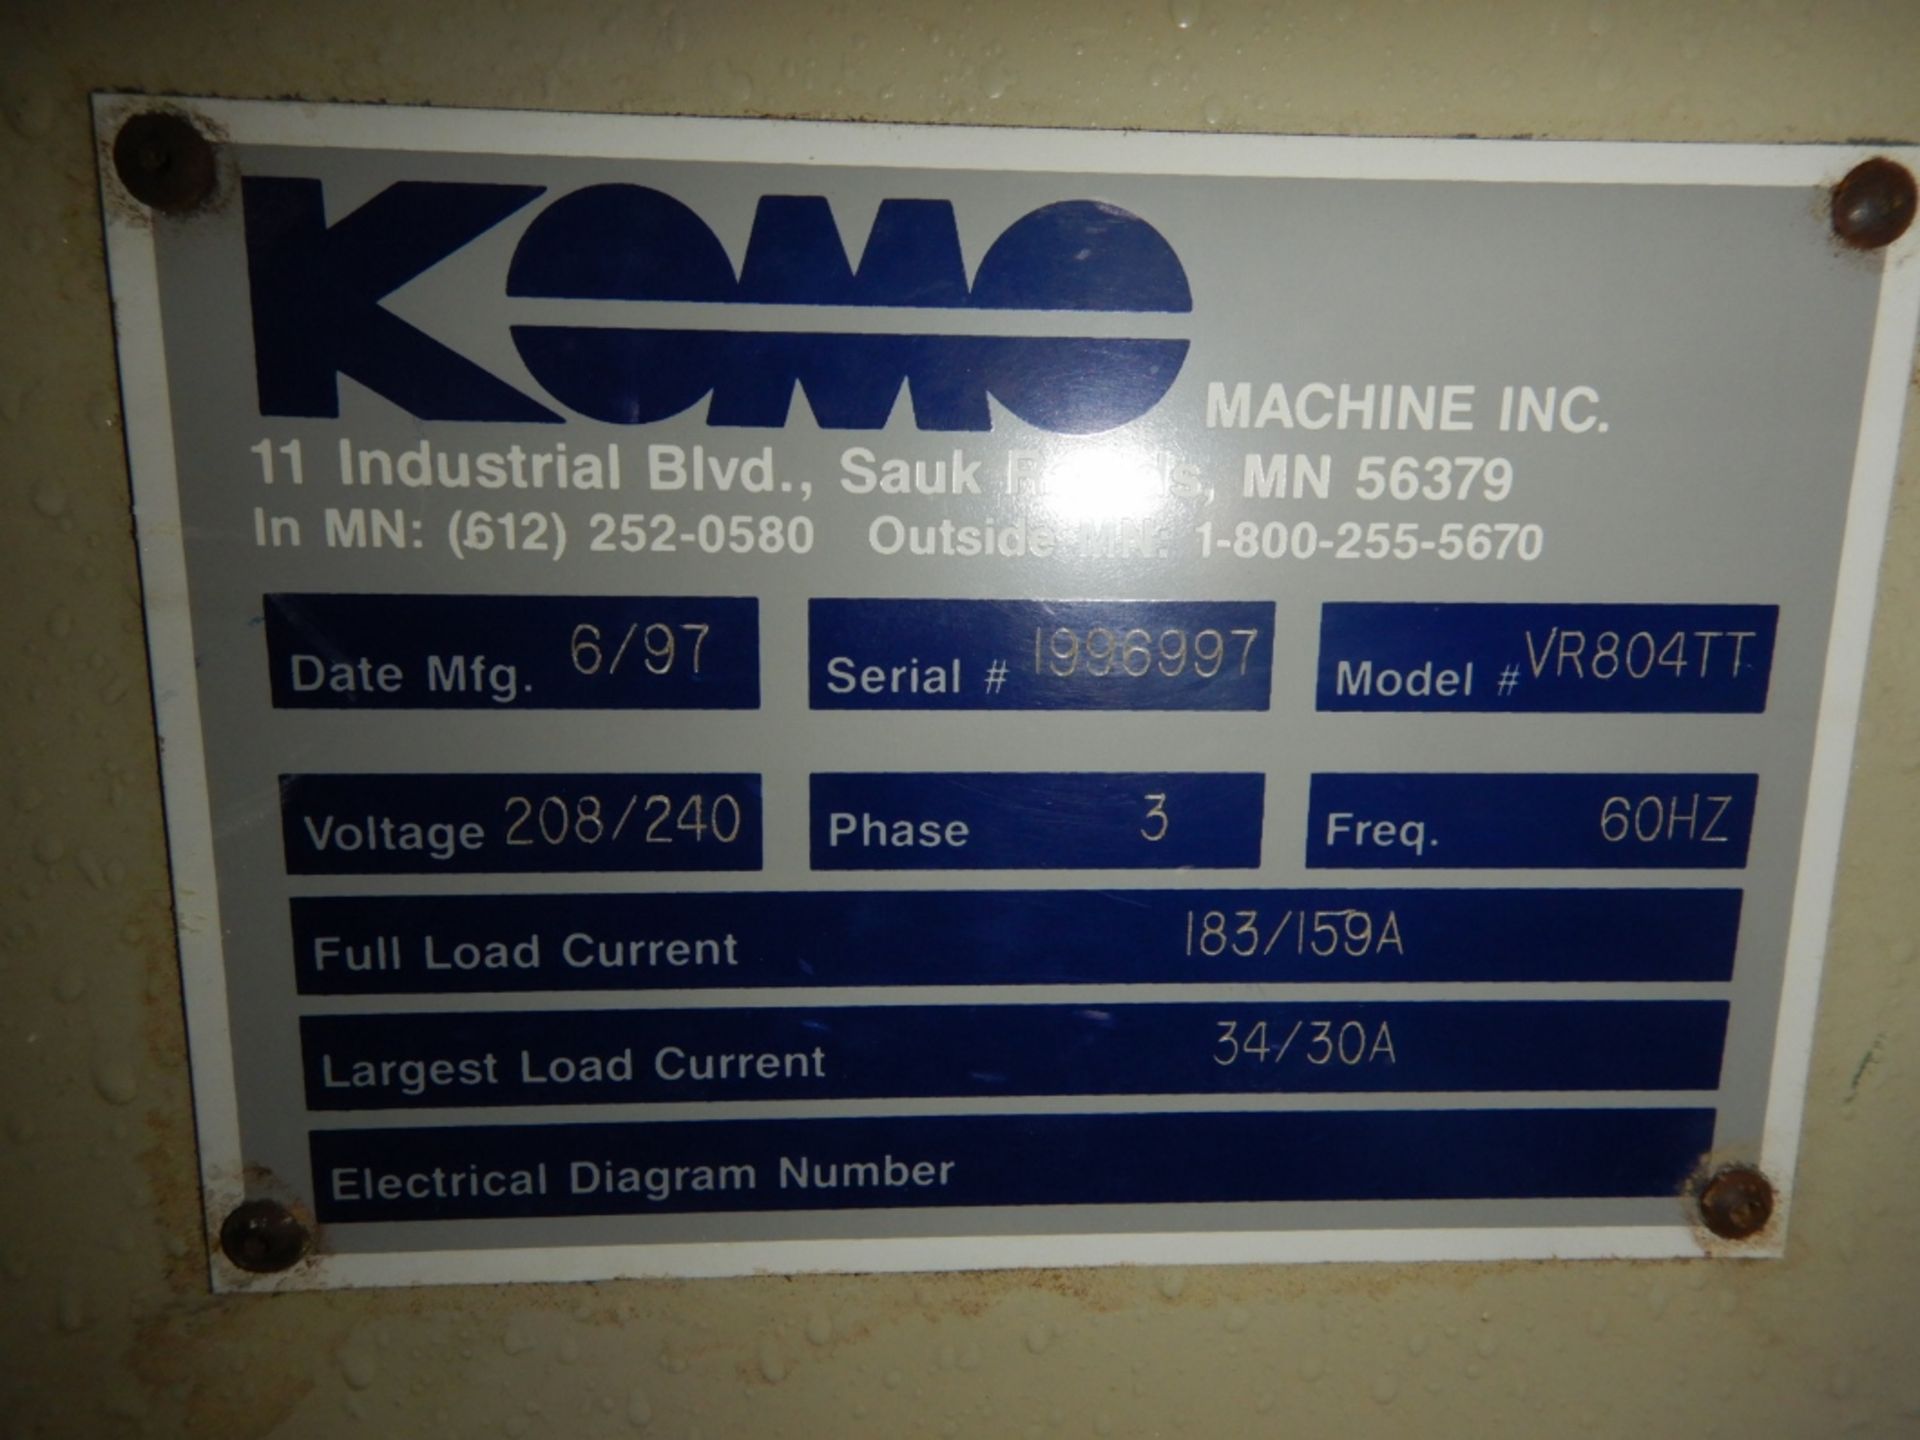 1997 KOMO VR804TT 4-HEAD CNC ROUTER TABLE W/ (2) 4FTX4FT VACUUM TABLES & PUMP, (NEEDS SOME TLC), - Image 12 of 12